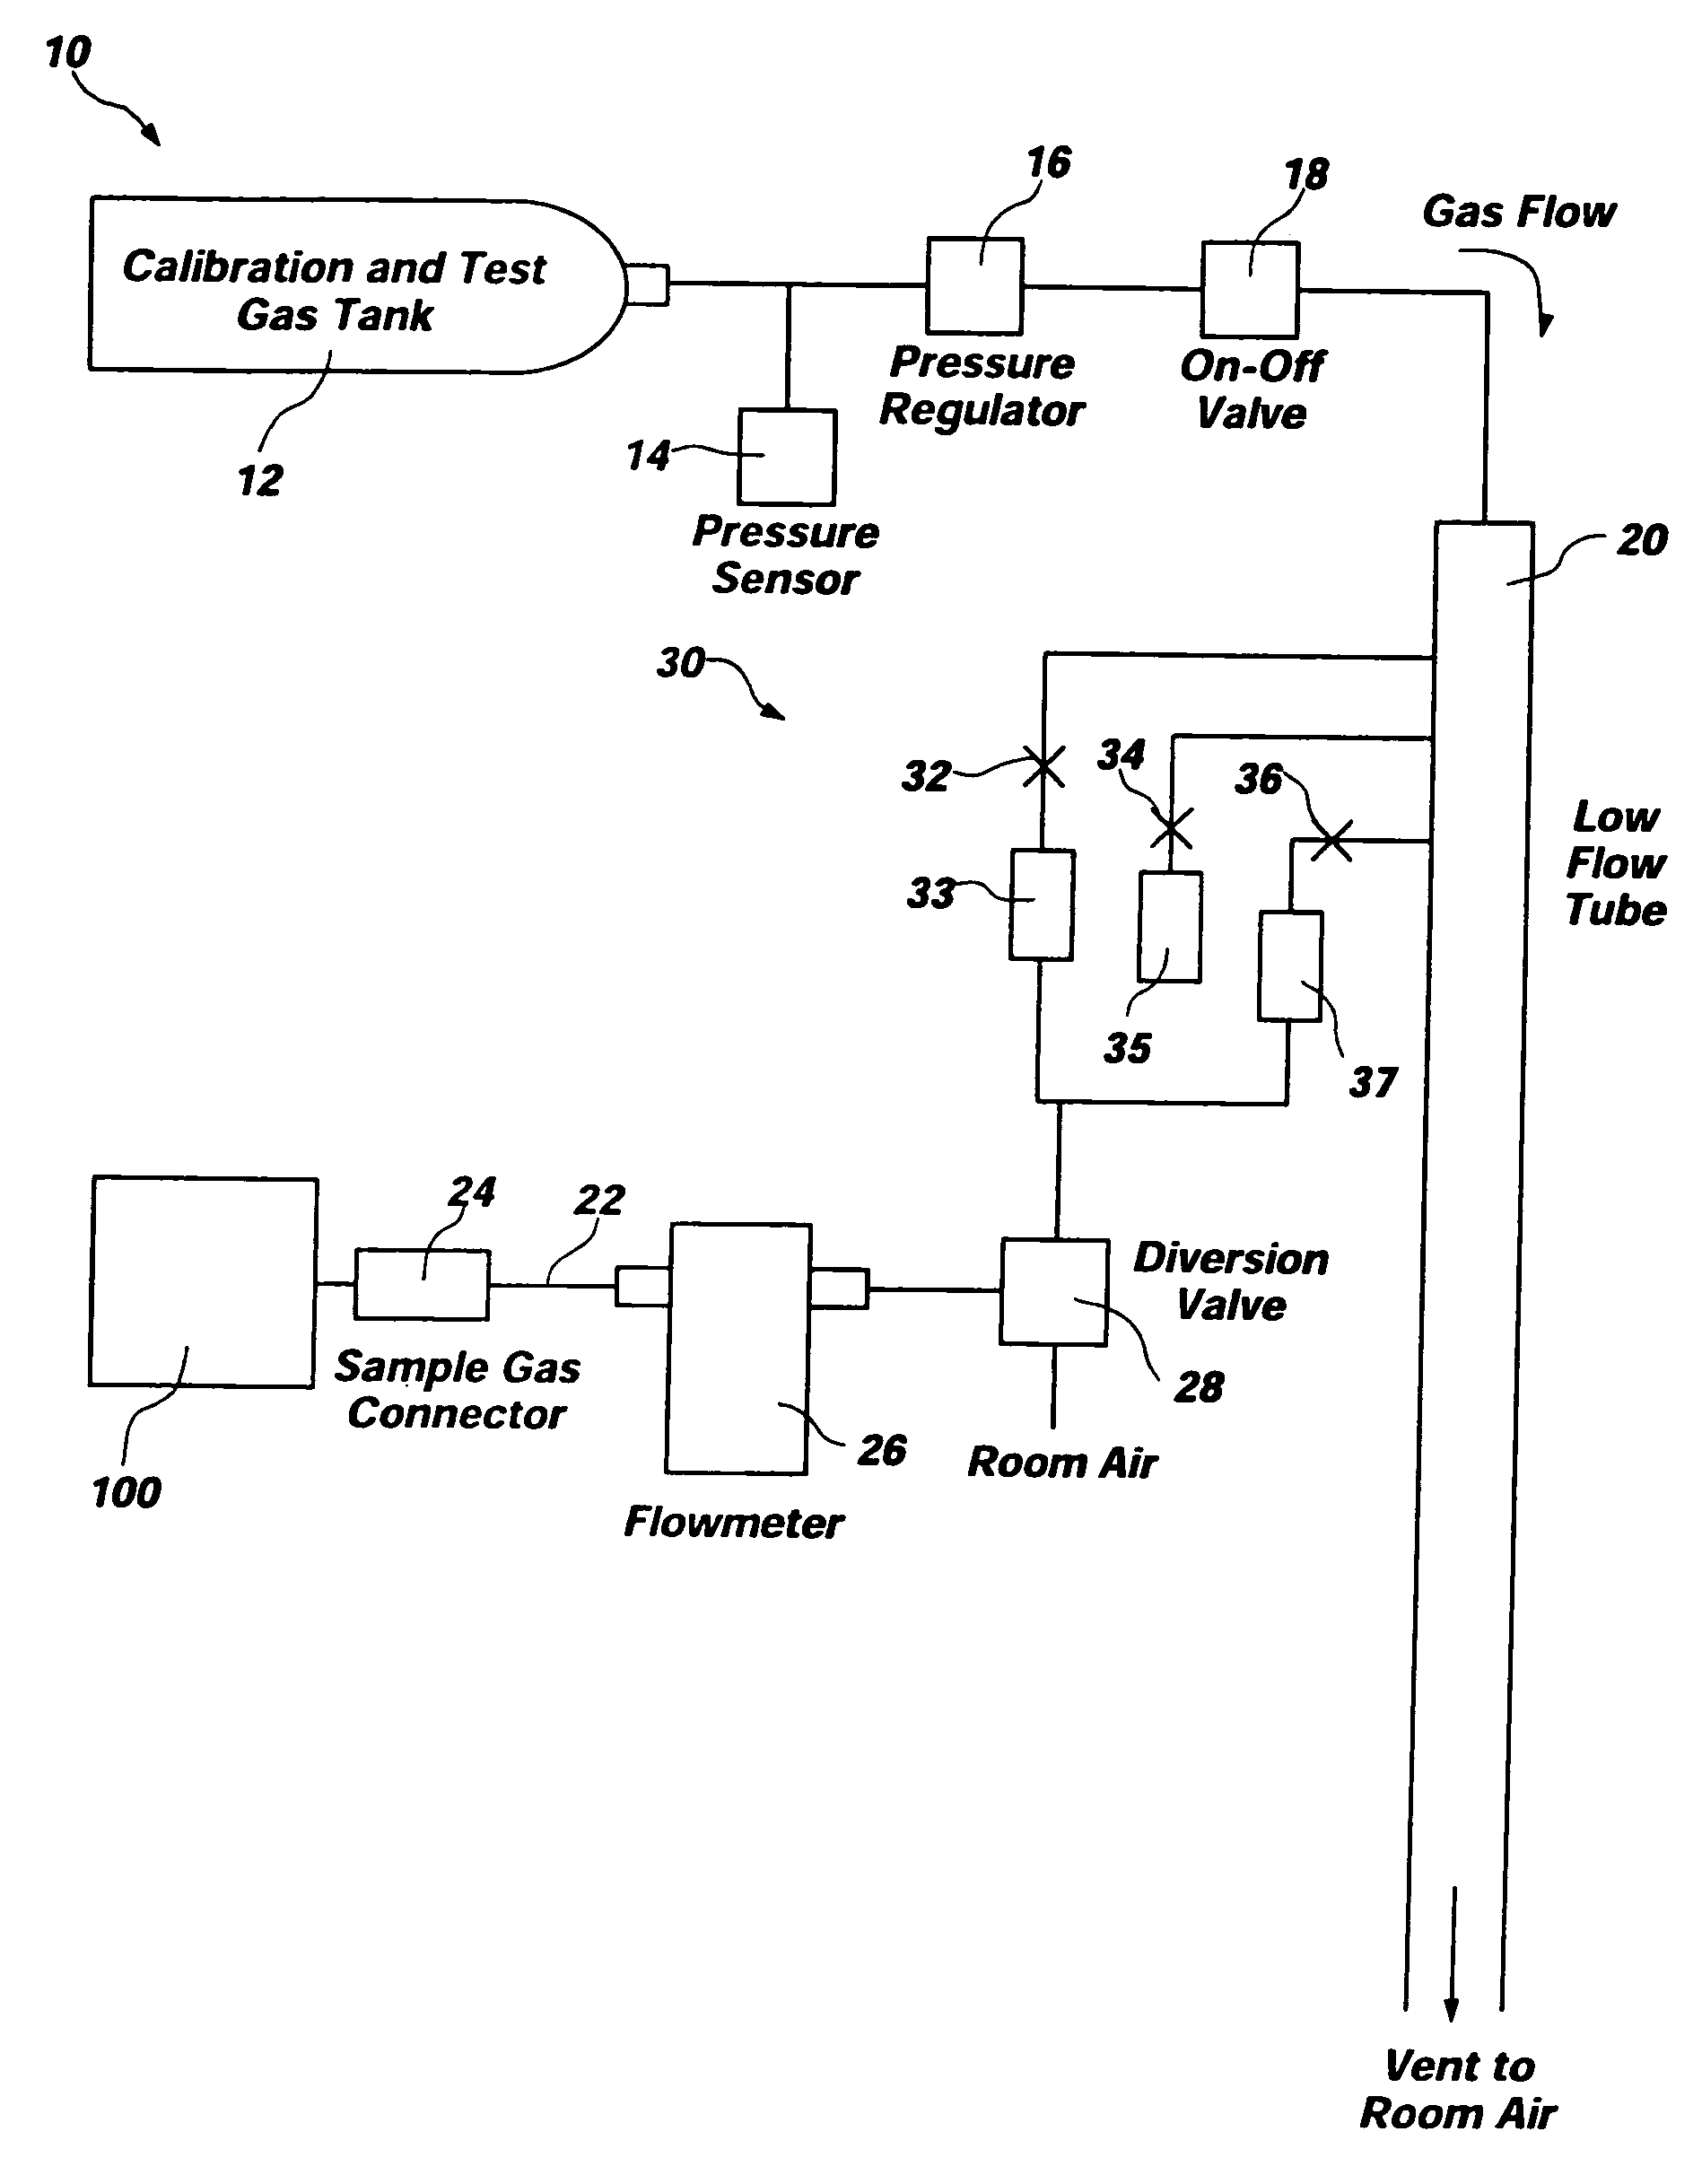 System for testing performance of medical gas or vapor analysis apparatus